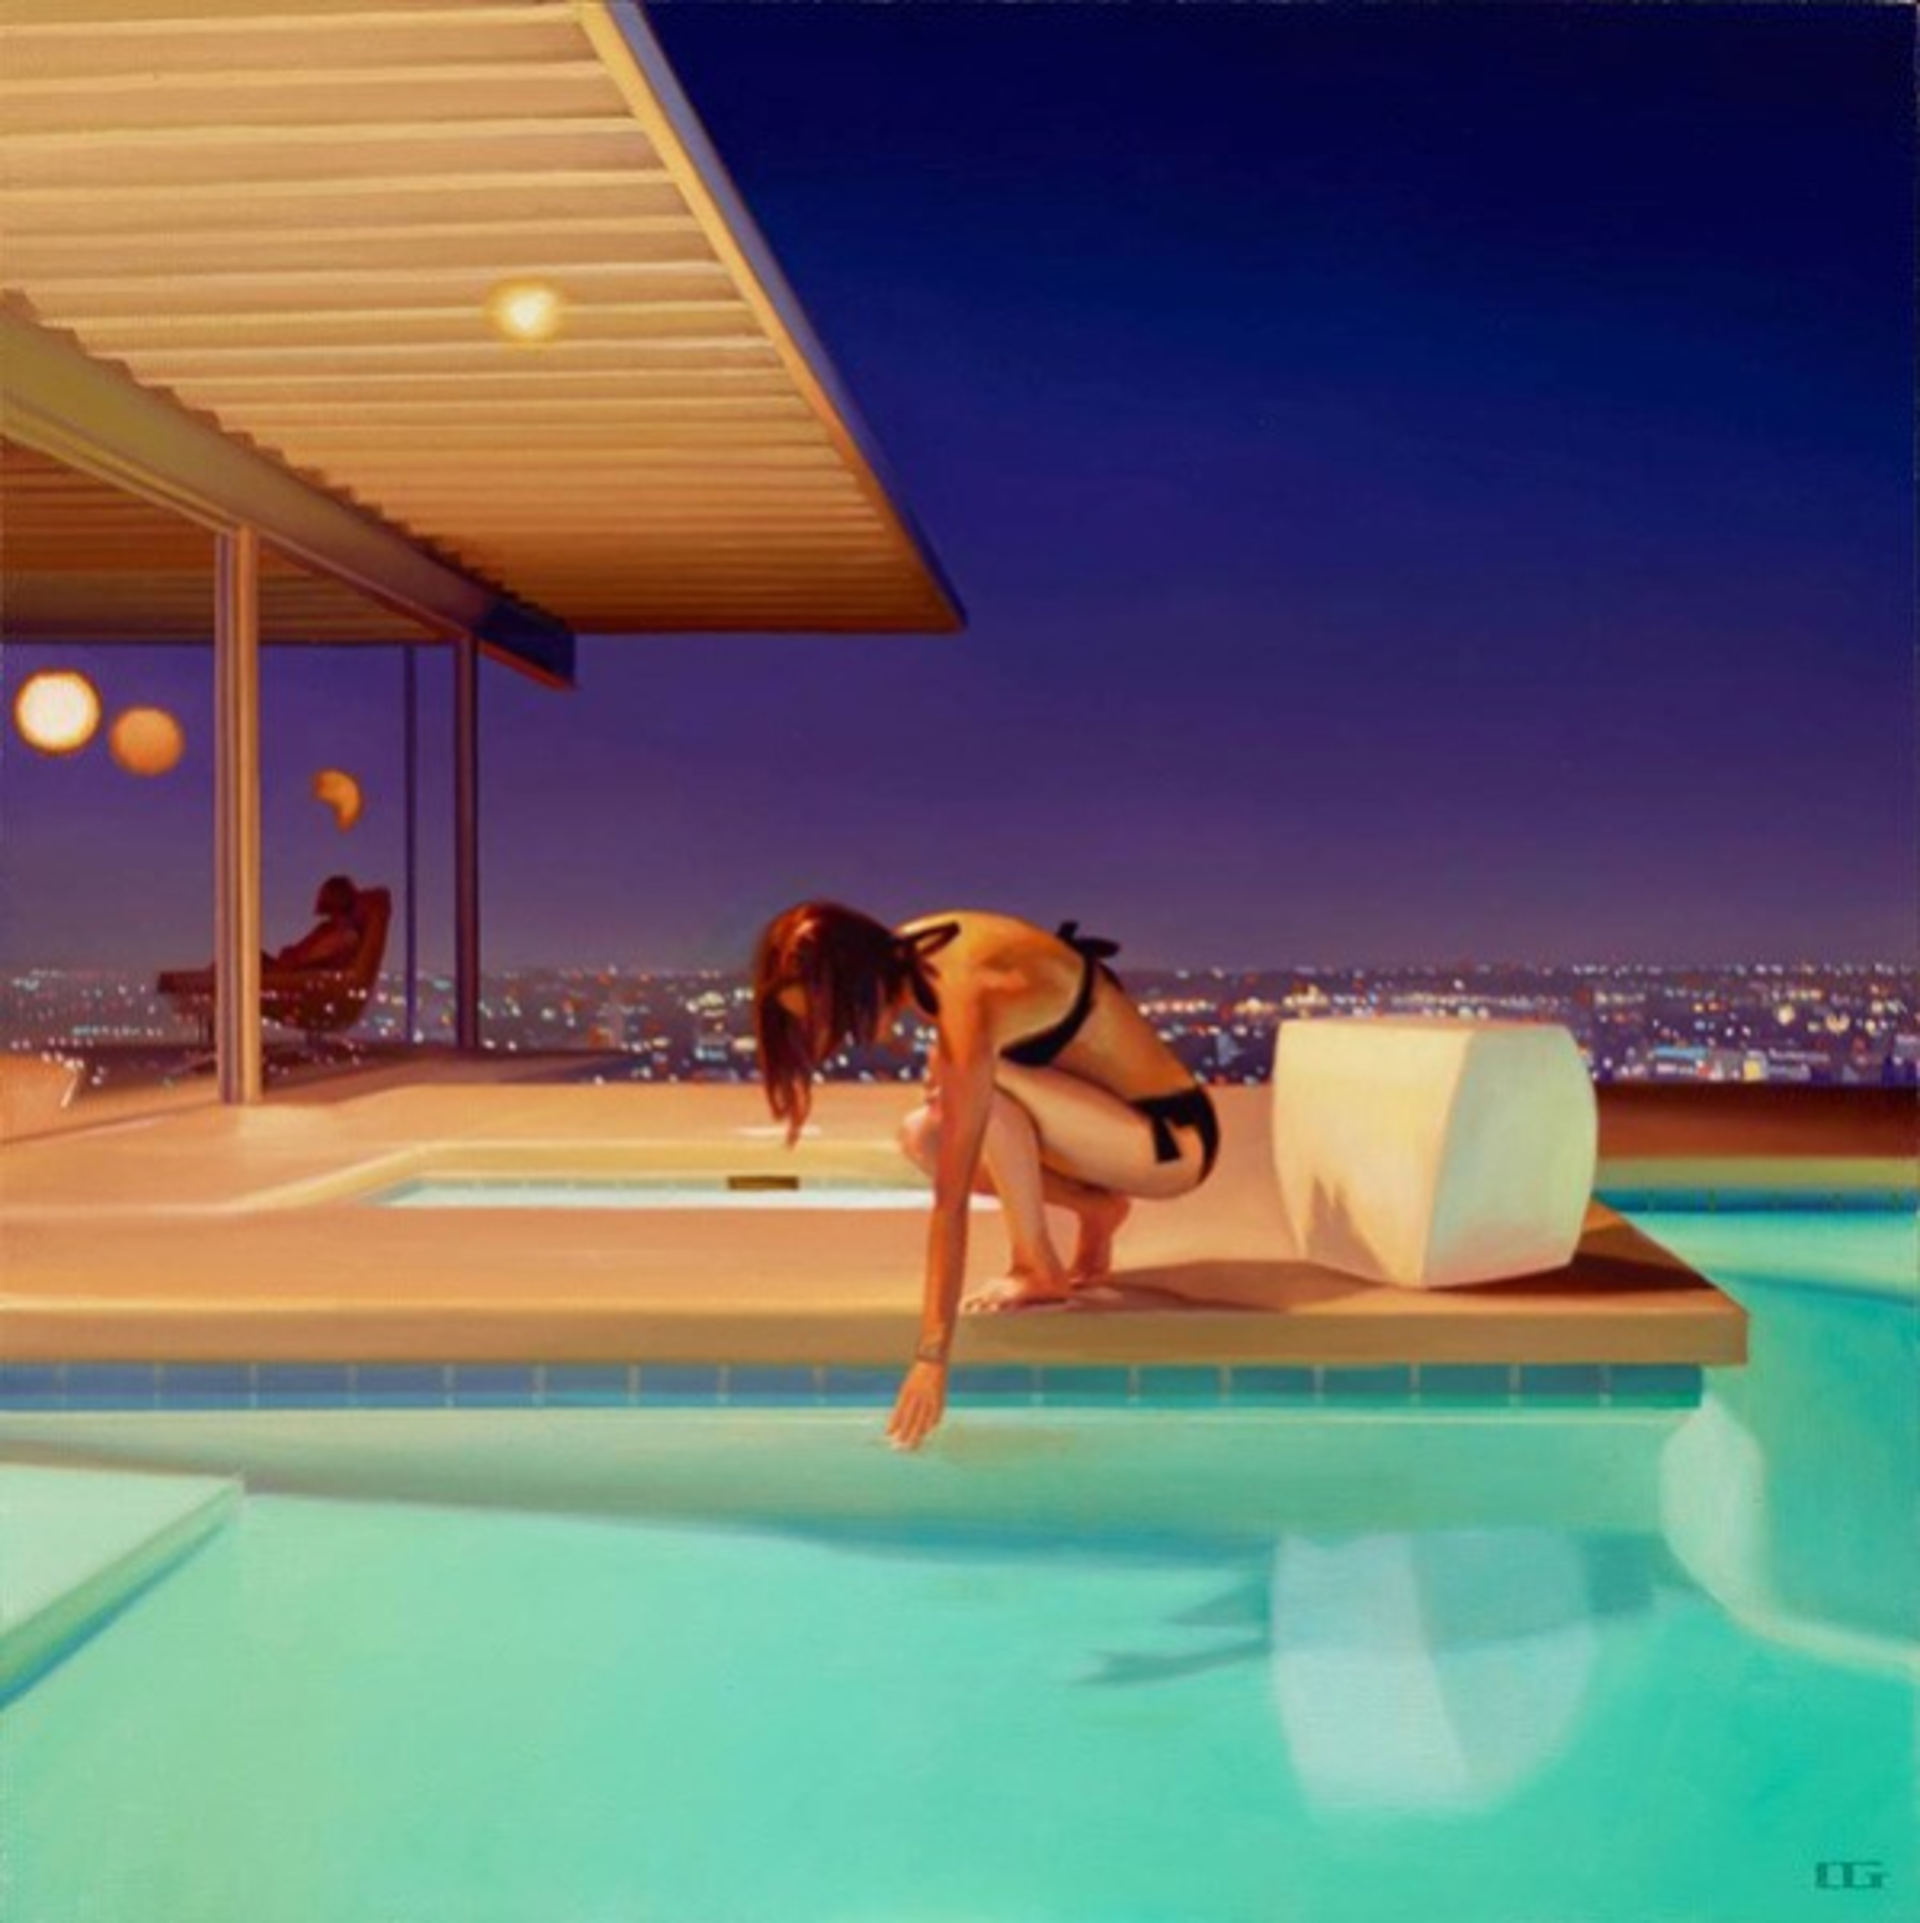 Elements (S/N) by Carrie Graber